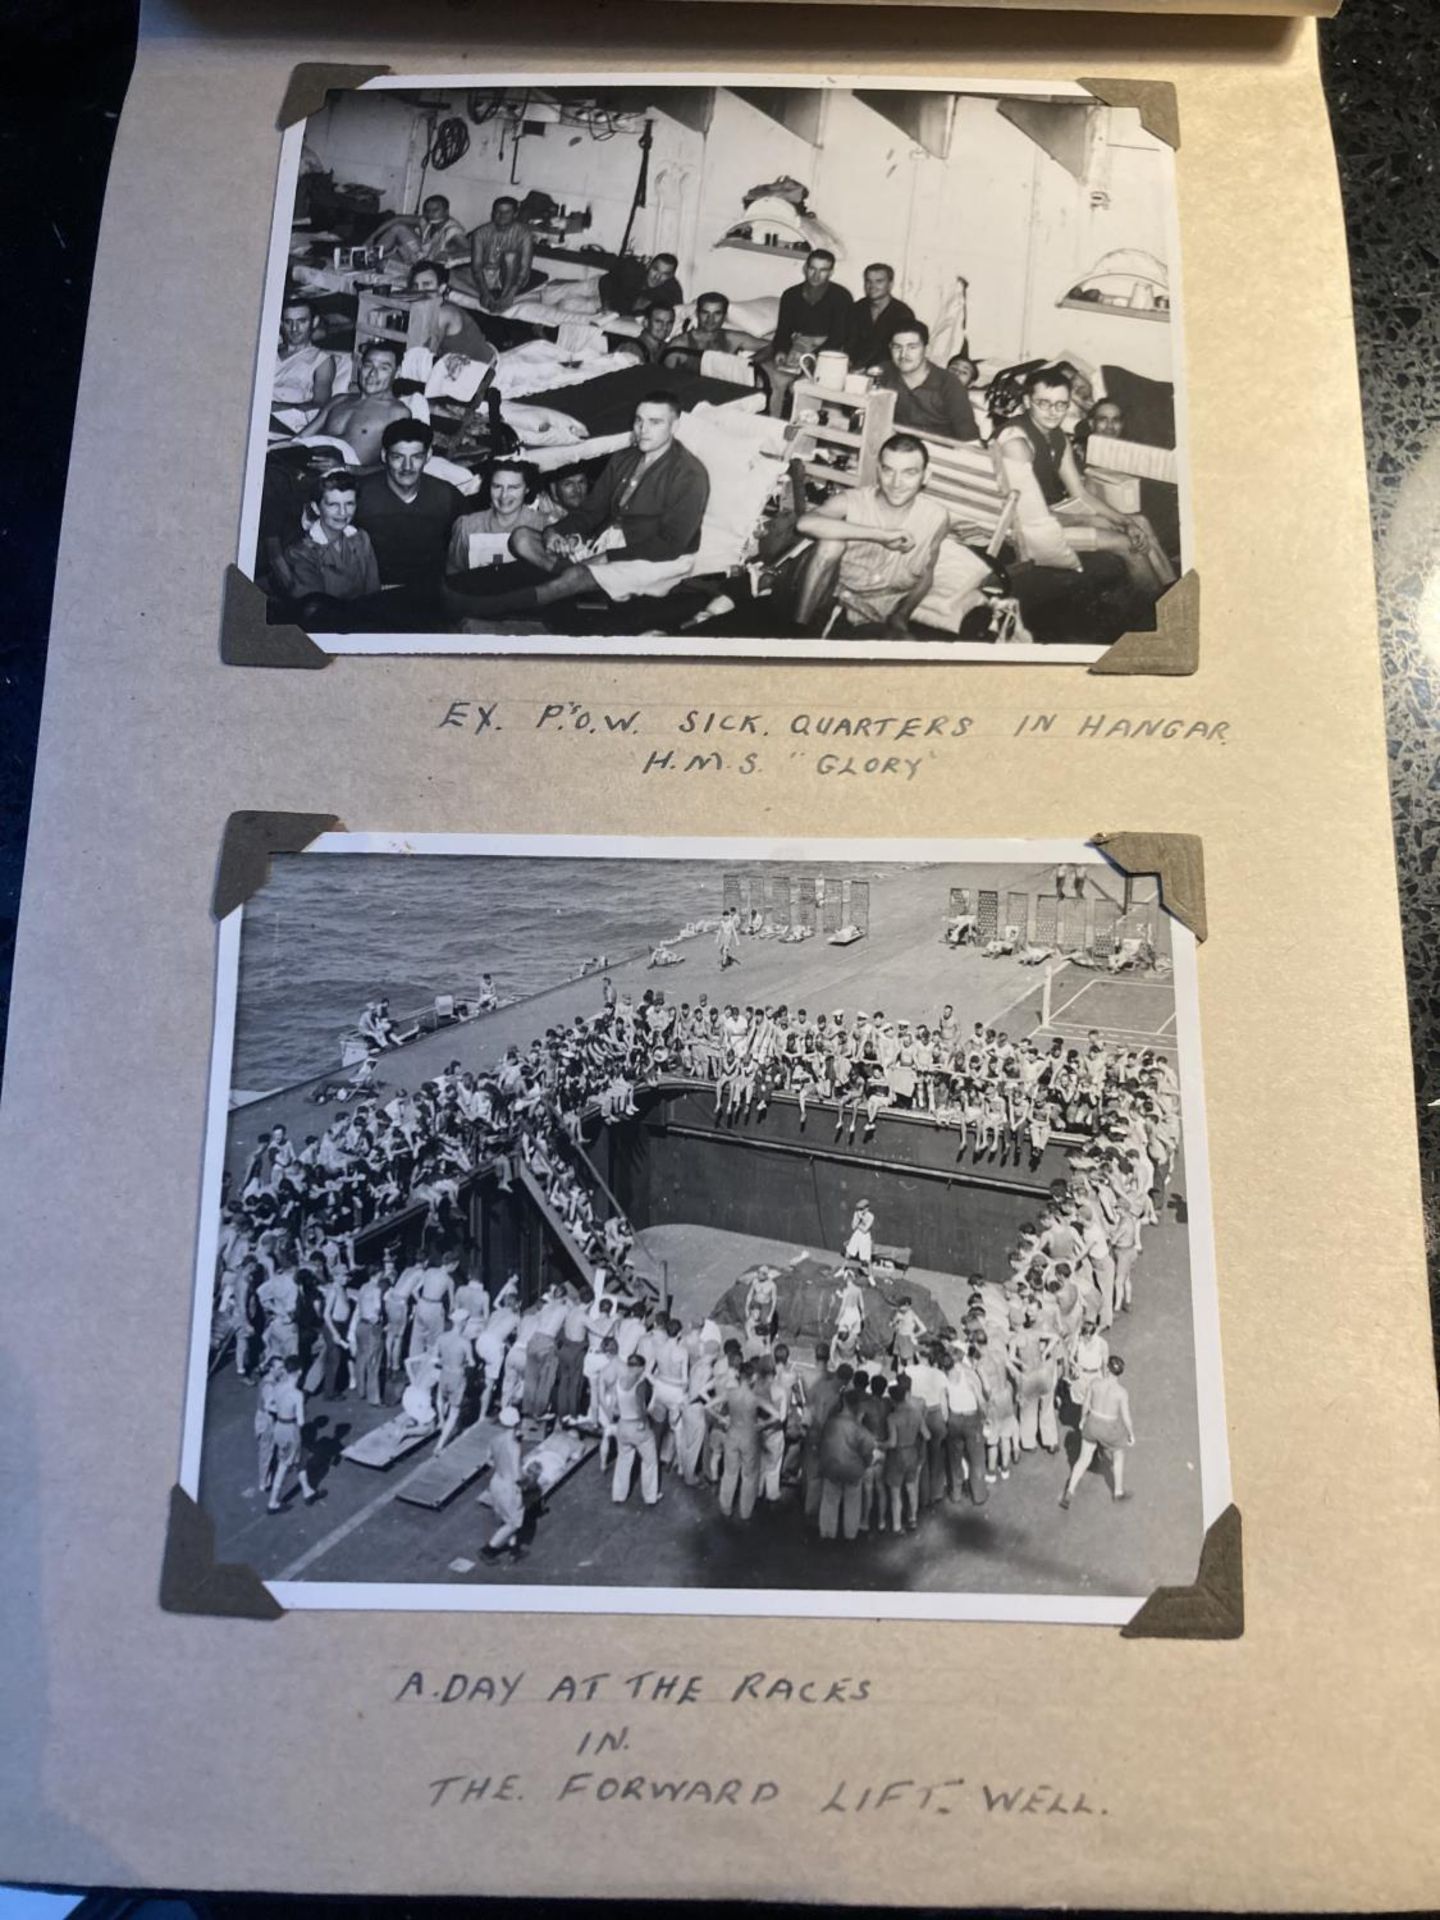 A WORLD WAR II PHOTOGRAPH ALBUM CONTAINING PHOTOGRAPHS OF THE JAPANESE SIGNING OF THE INSTRUMENT - Image 7 of 10